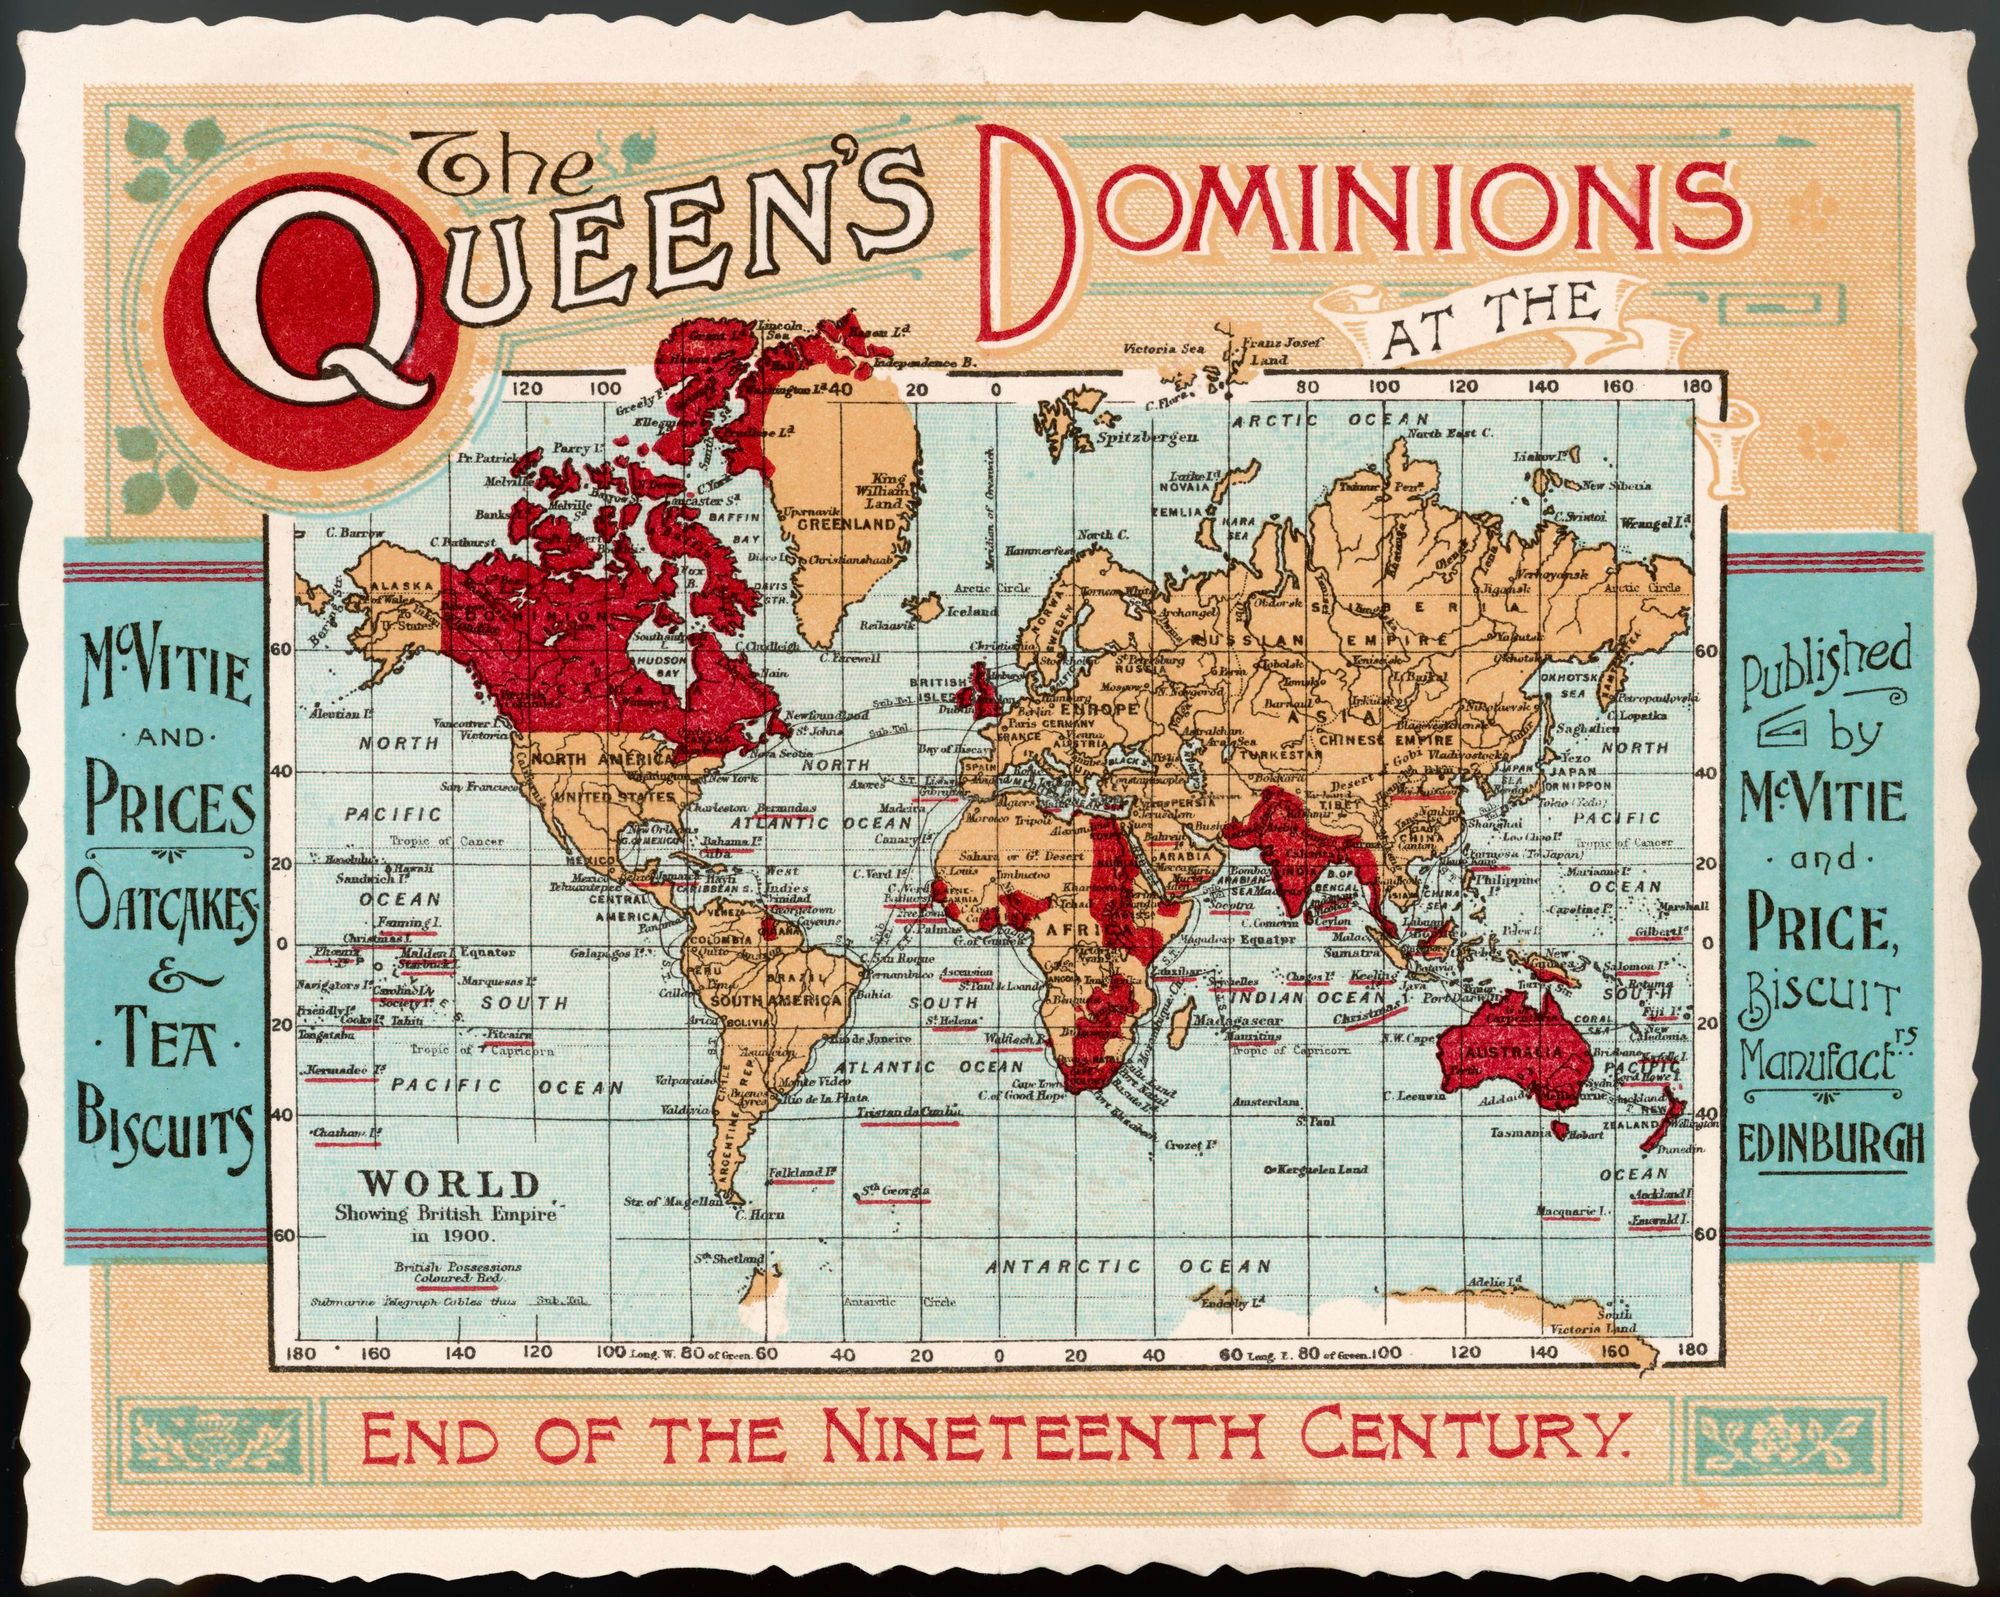 An illustration of the British Empire from 1898. Source: Canadian War Museum. https://www.alamy.com/stock-photo-a-map-of-the-world-showing-the-british-empire-coloured-in-red-at-the-105289649.html